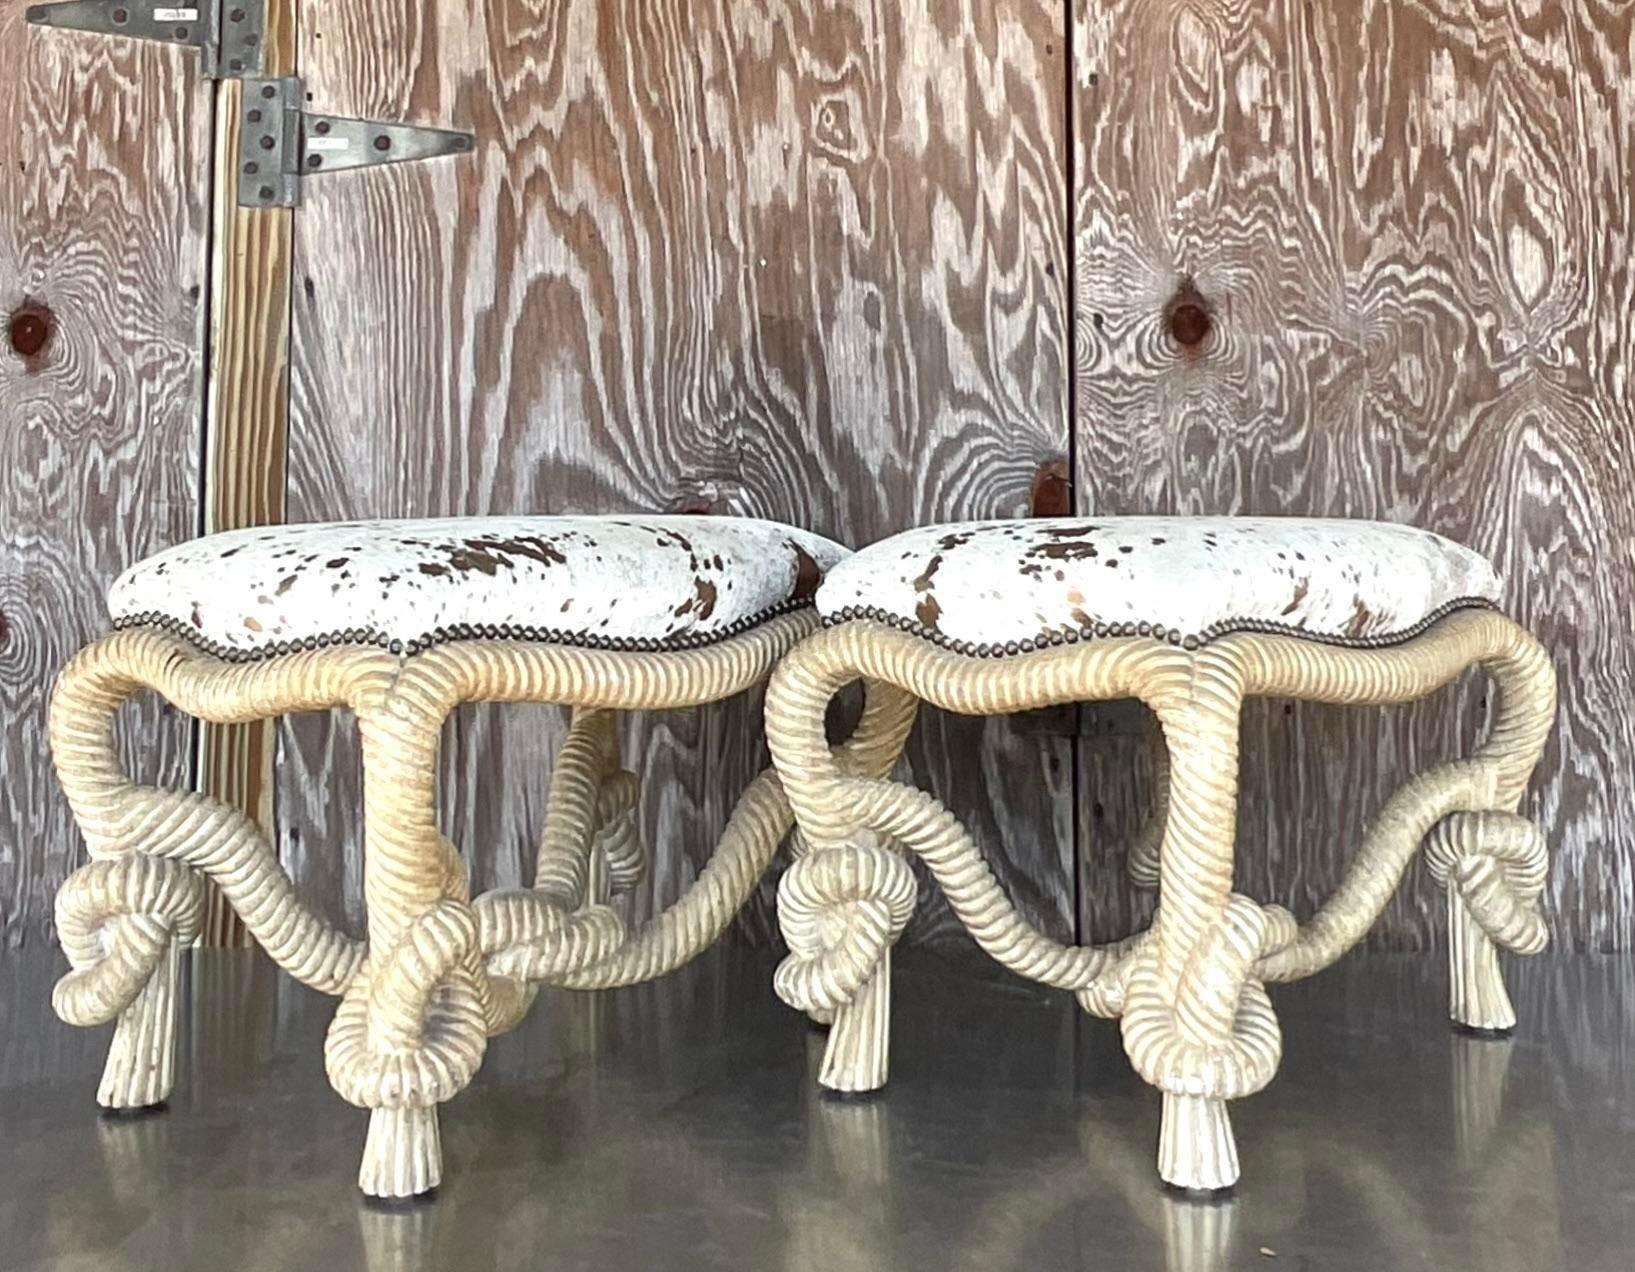 Italian Vintage Regency Rope and Knot Stools - a Pair For Sale